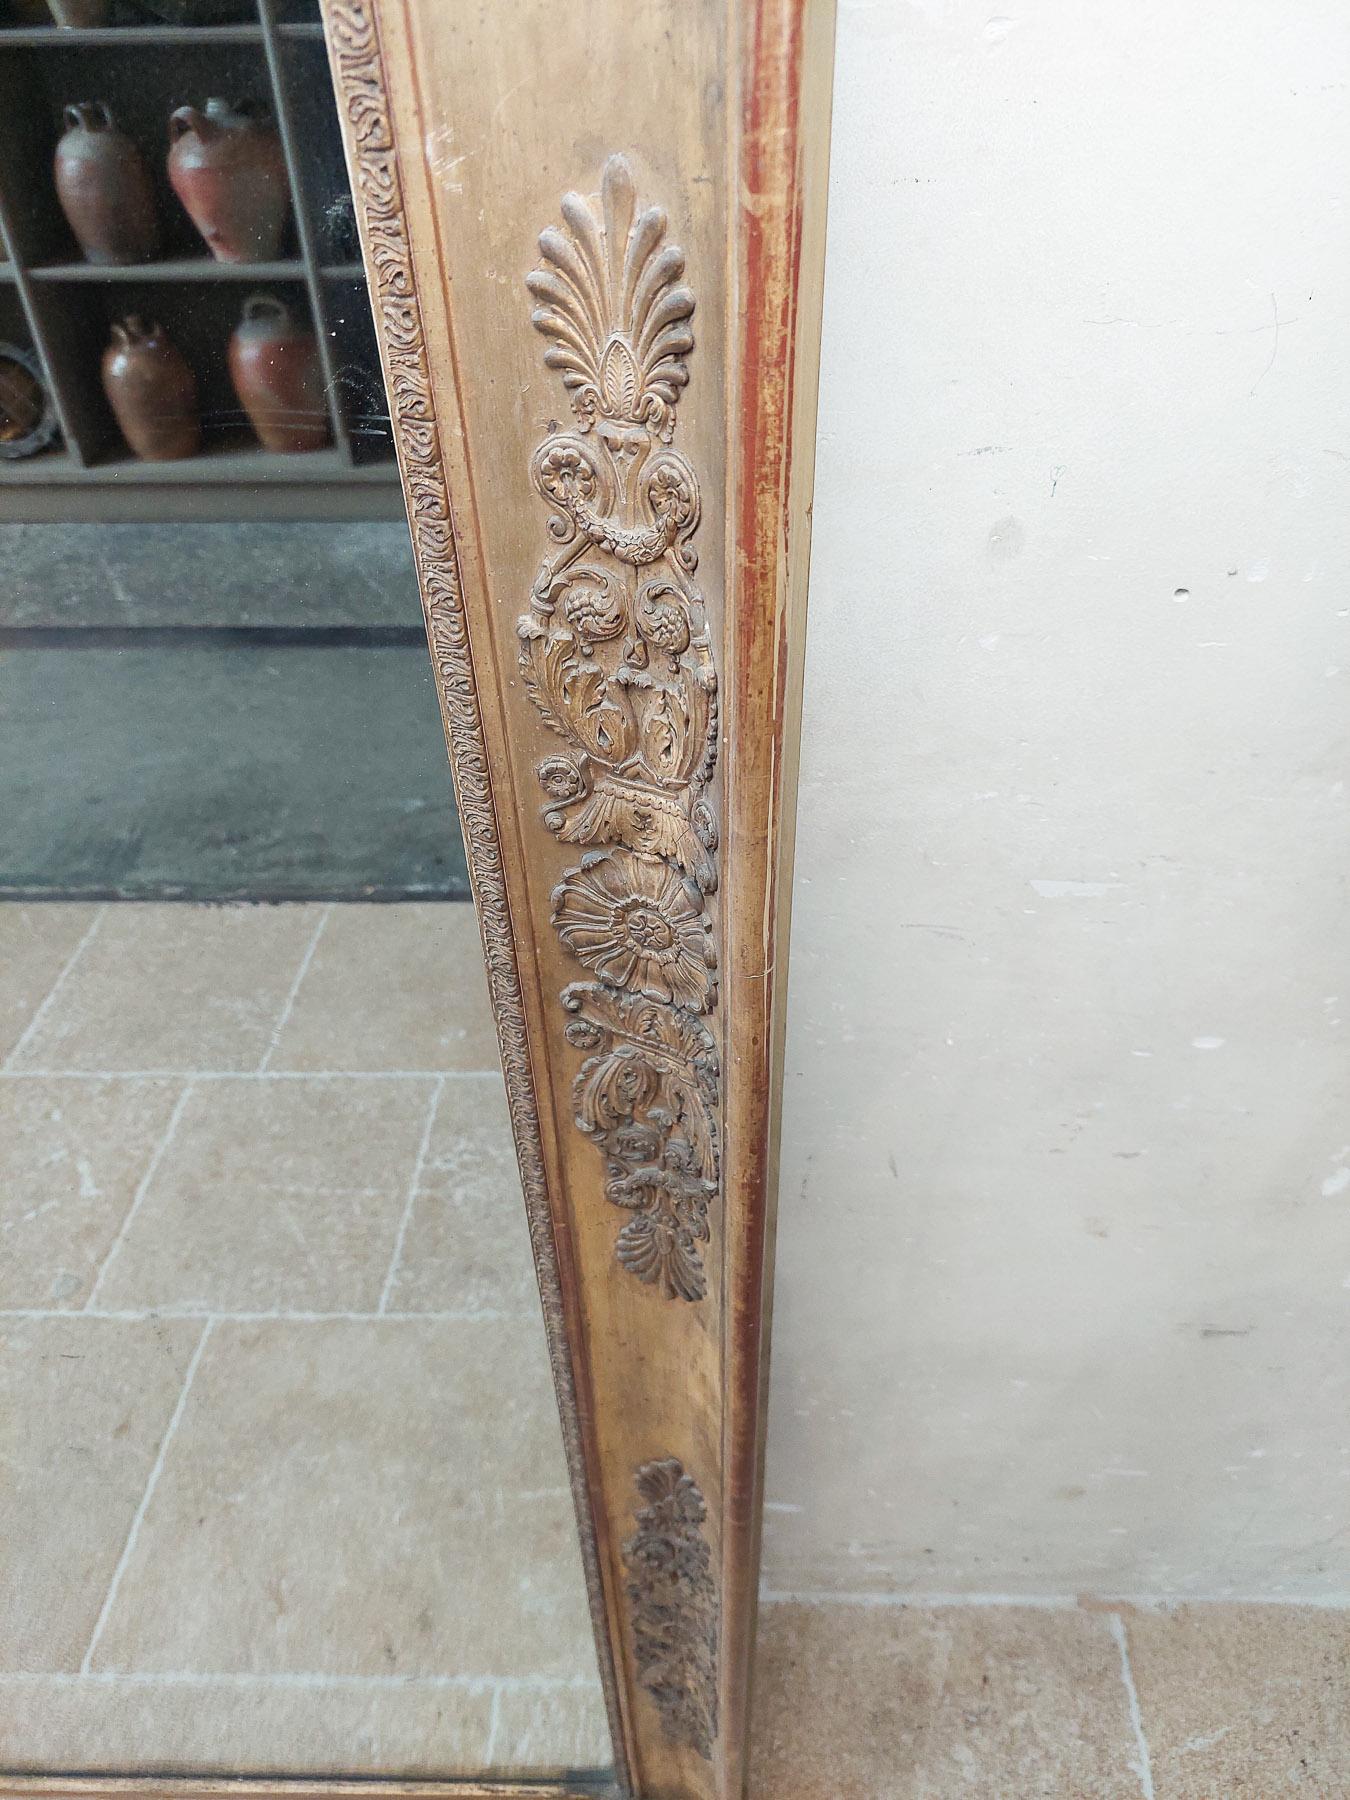 Antique Carved and Gilt Wood Empire Trumeau Mirror from ± 1800 - 1820 4